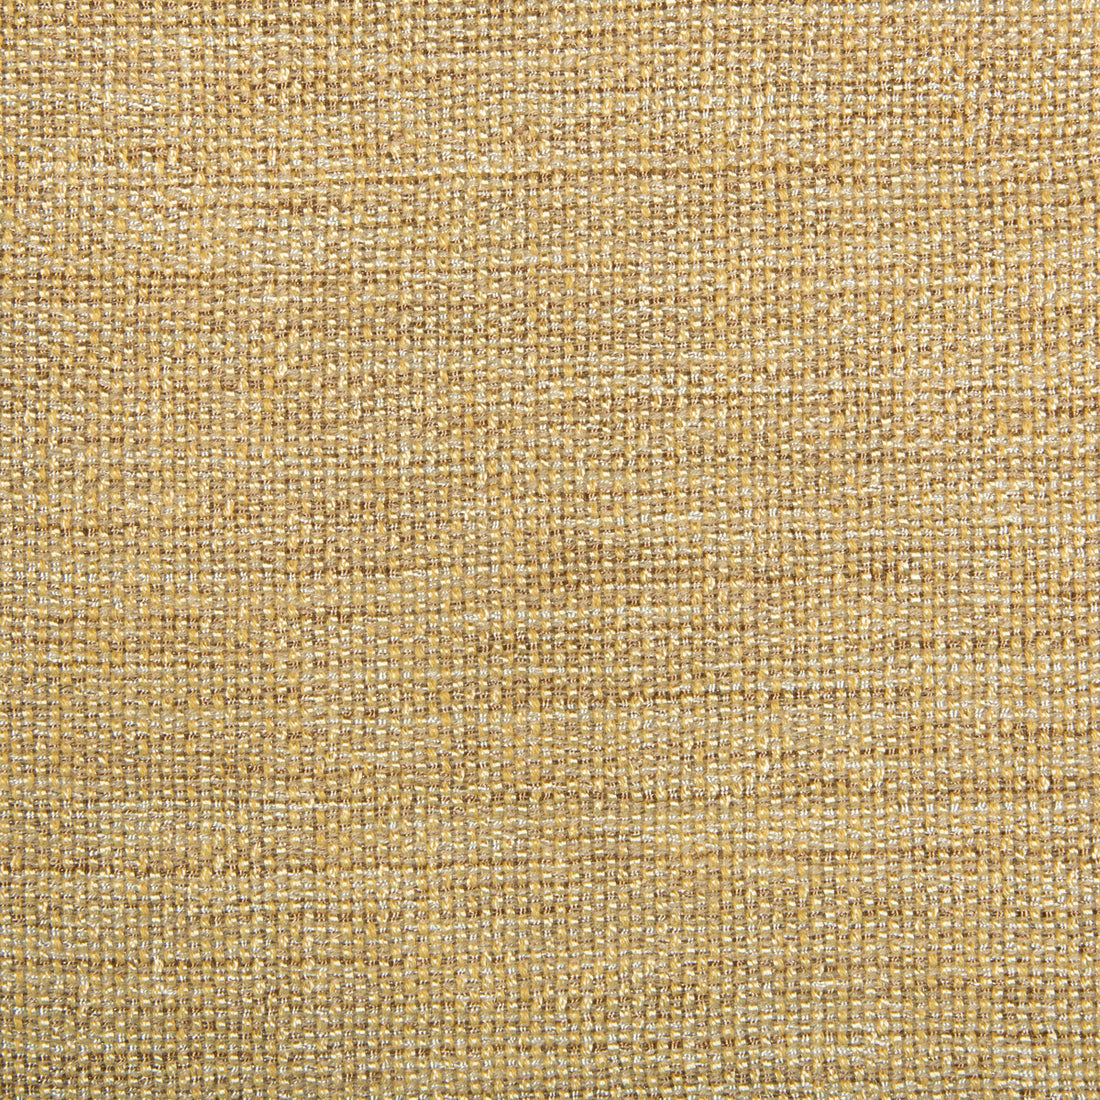 Kravet Contract fabric in 4458-414 color - pattern 4458.414.0 - by Kravet Contract